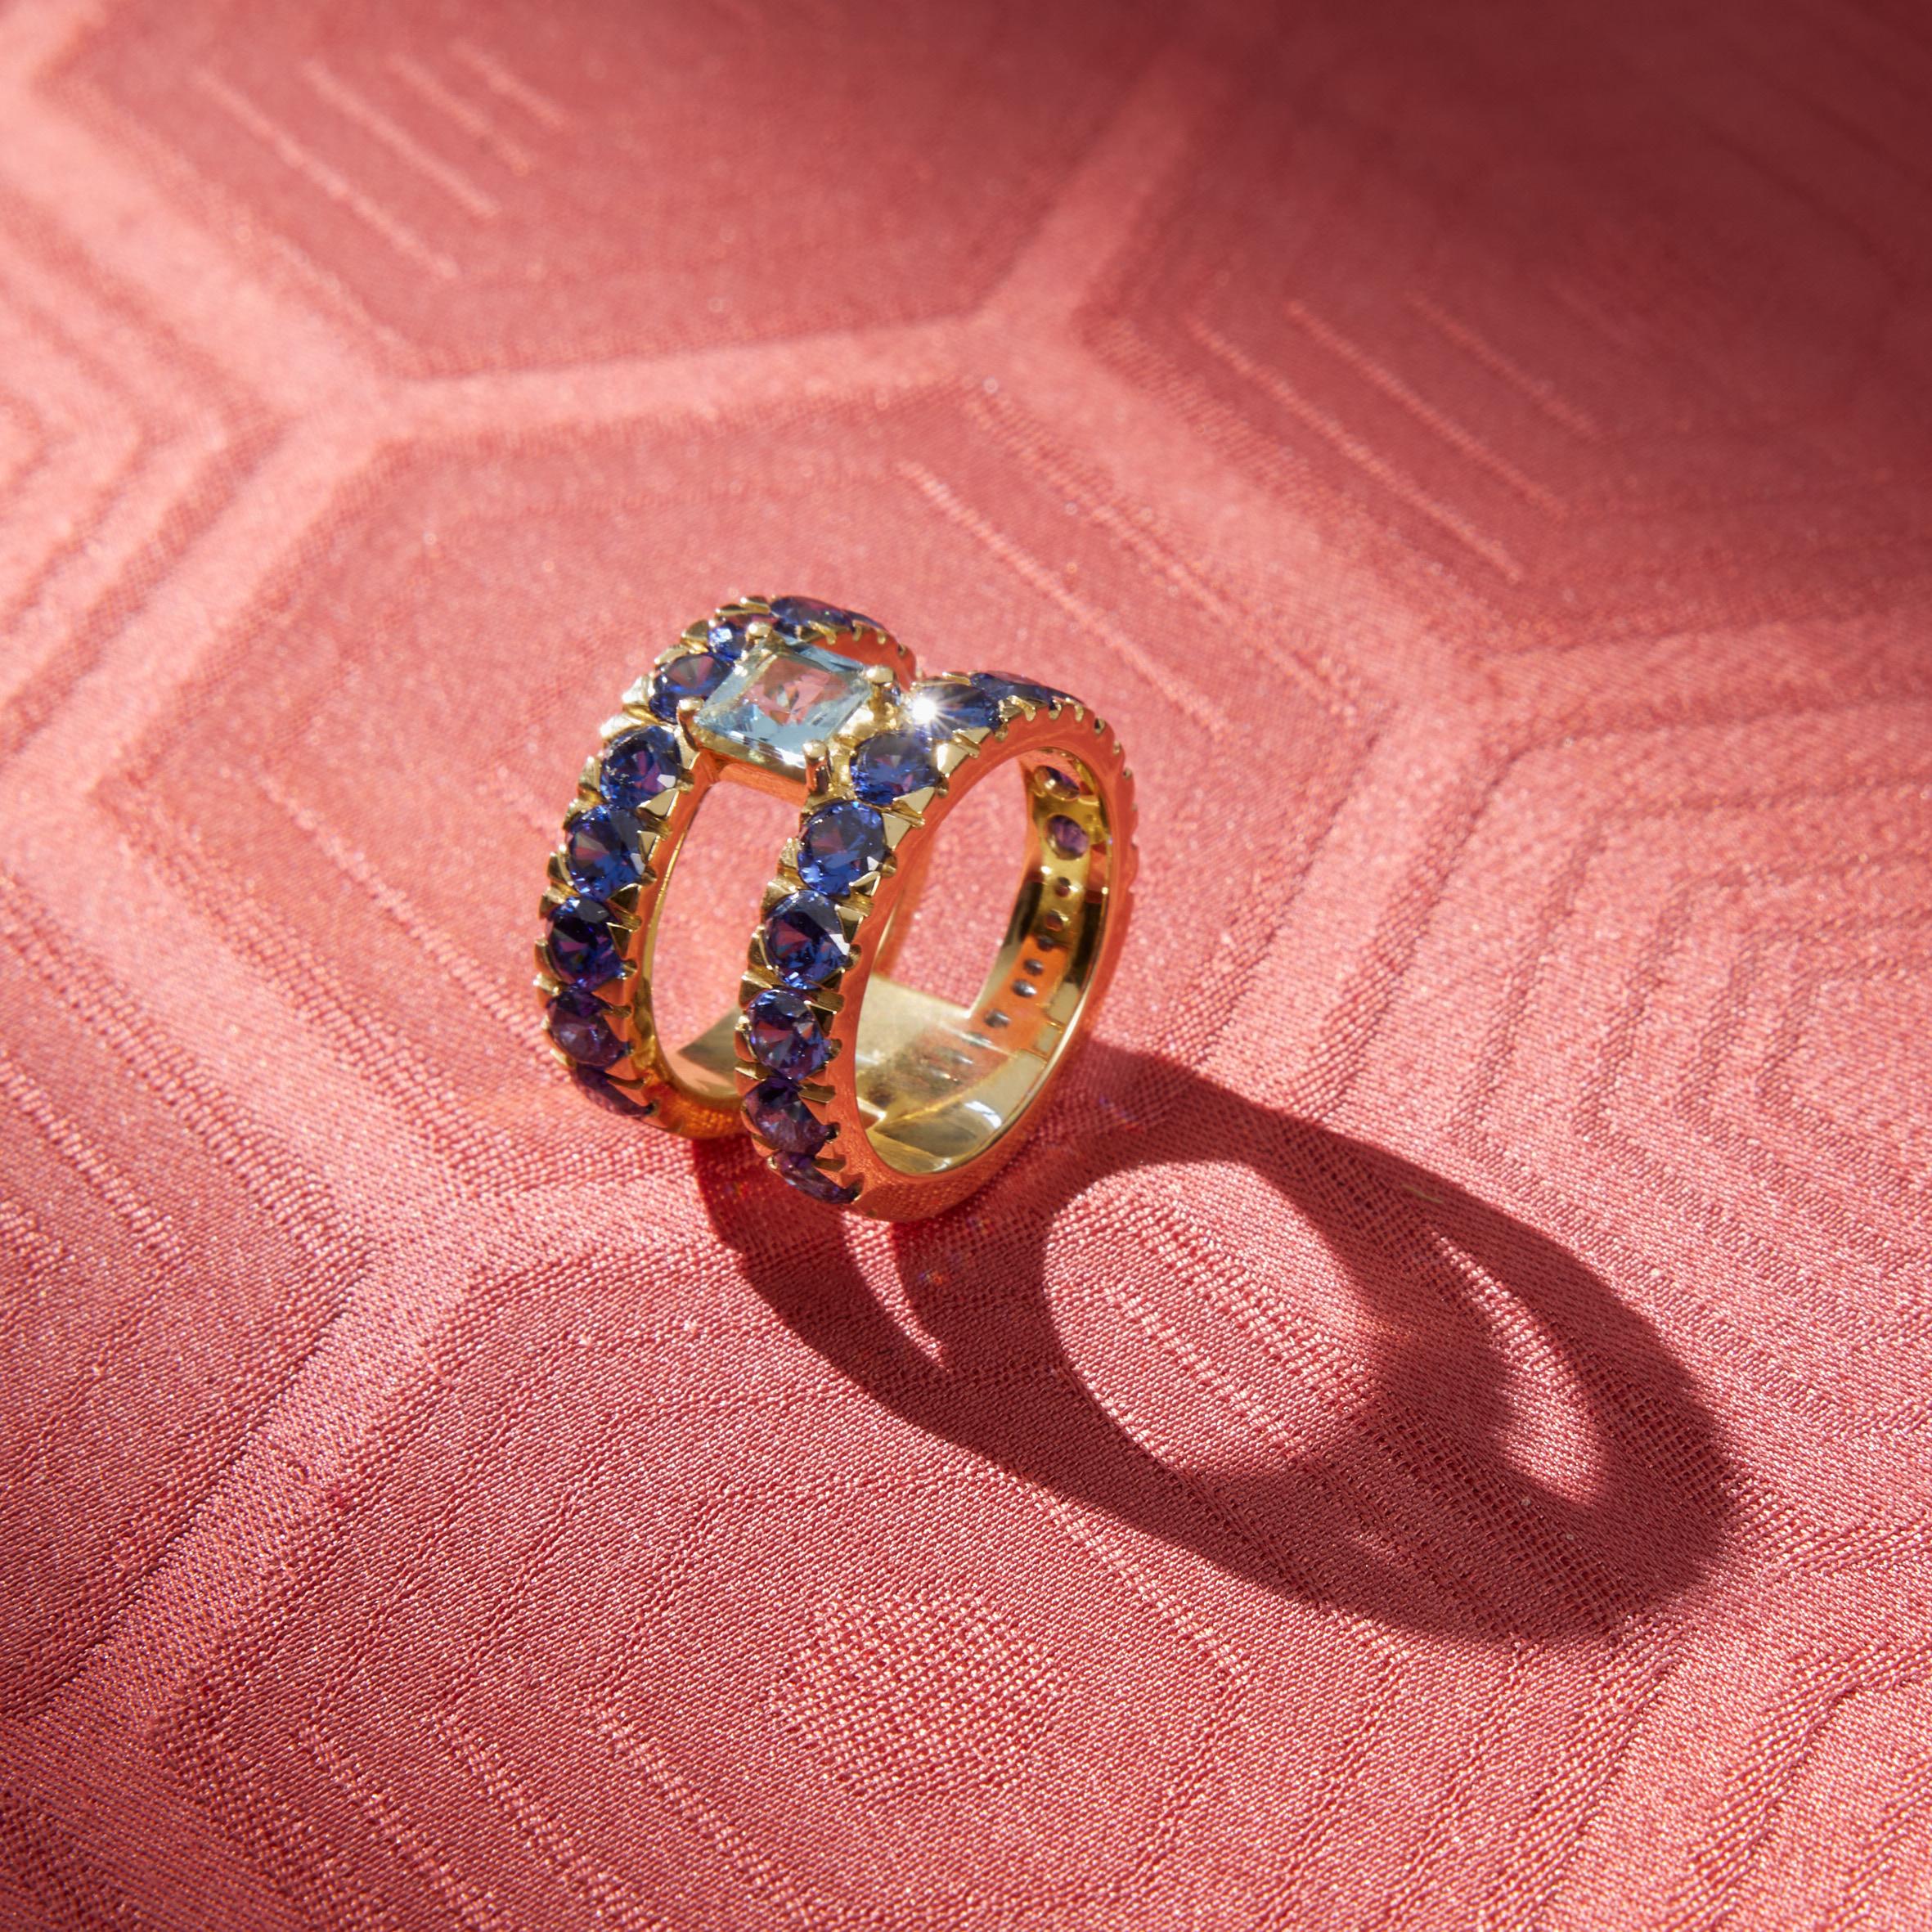 double  sapphire blue  ring linked with aquamarine in the medal 18k gold gr19,
size 13 eu.
All Giulia Colussi jewelry is new and has never been previously owned or worn. Each item will arrive at your door beautifully gift wrapped in our boxes, put